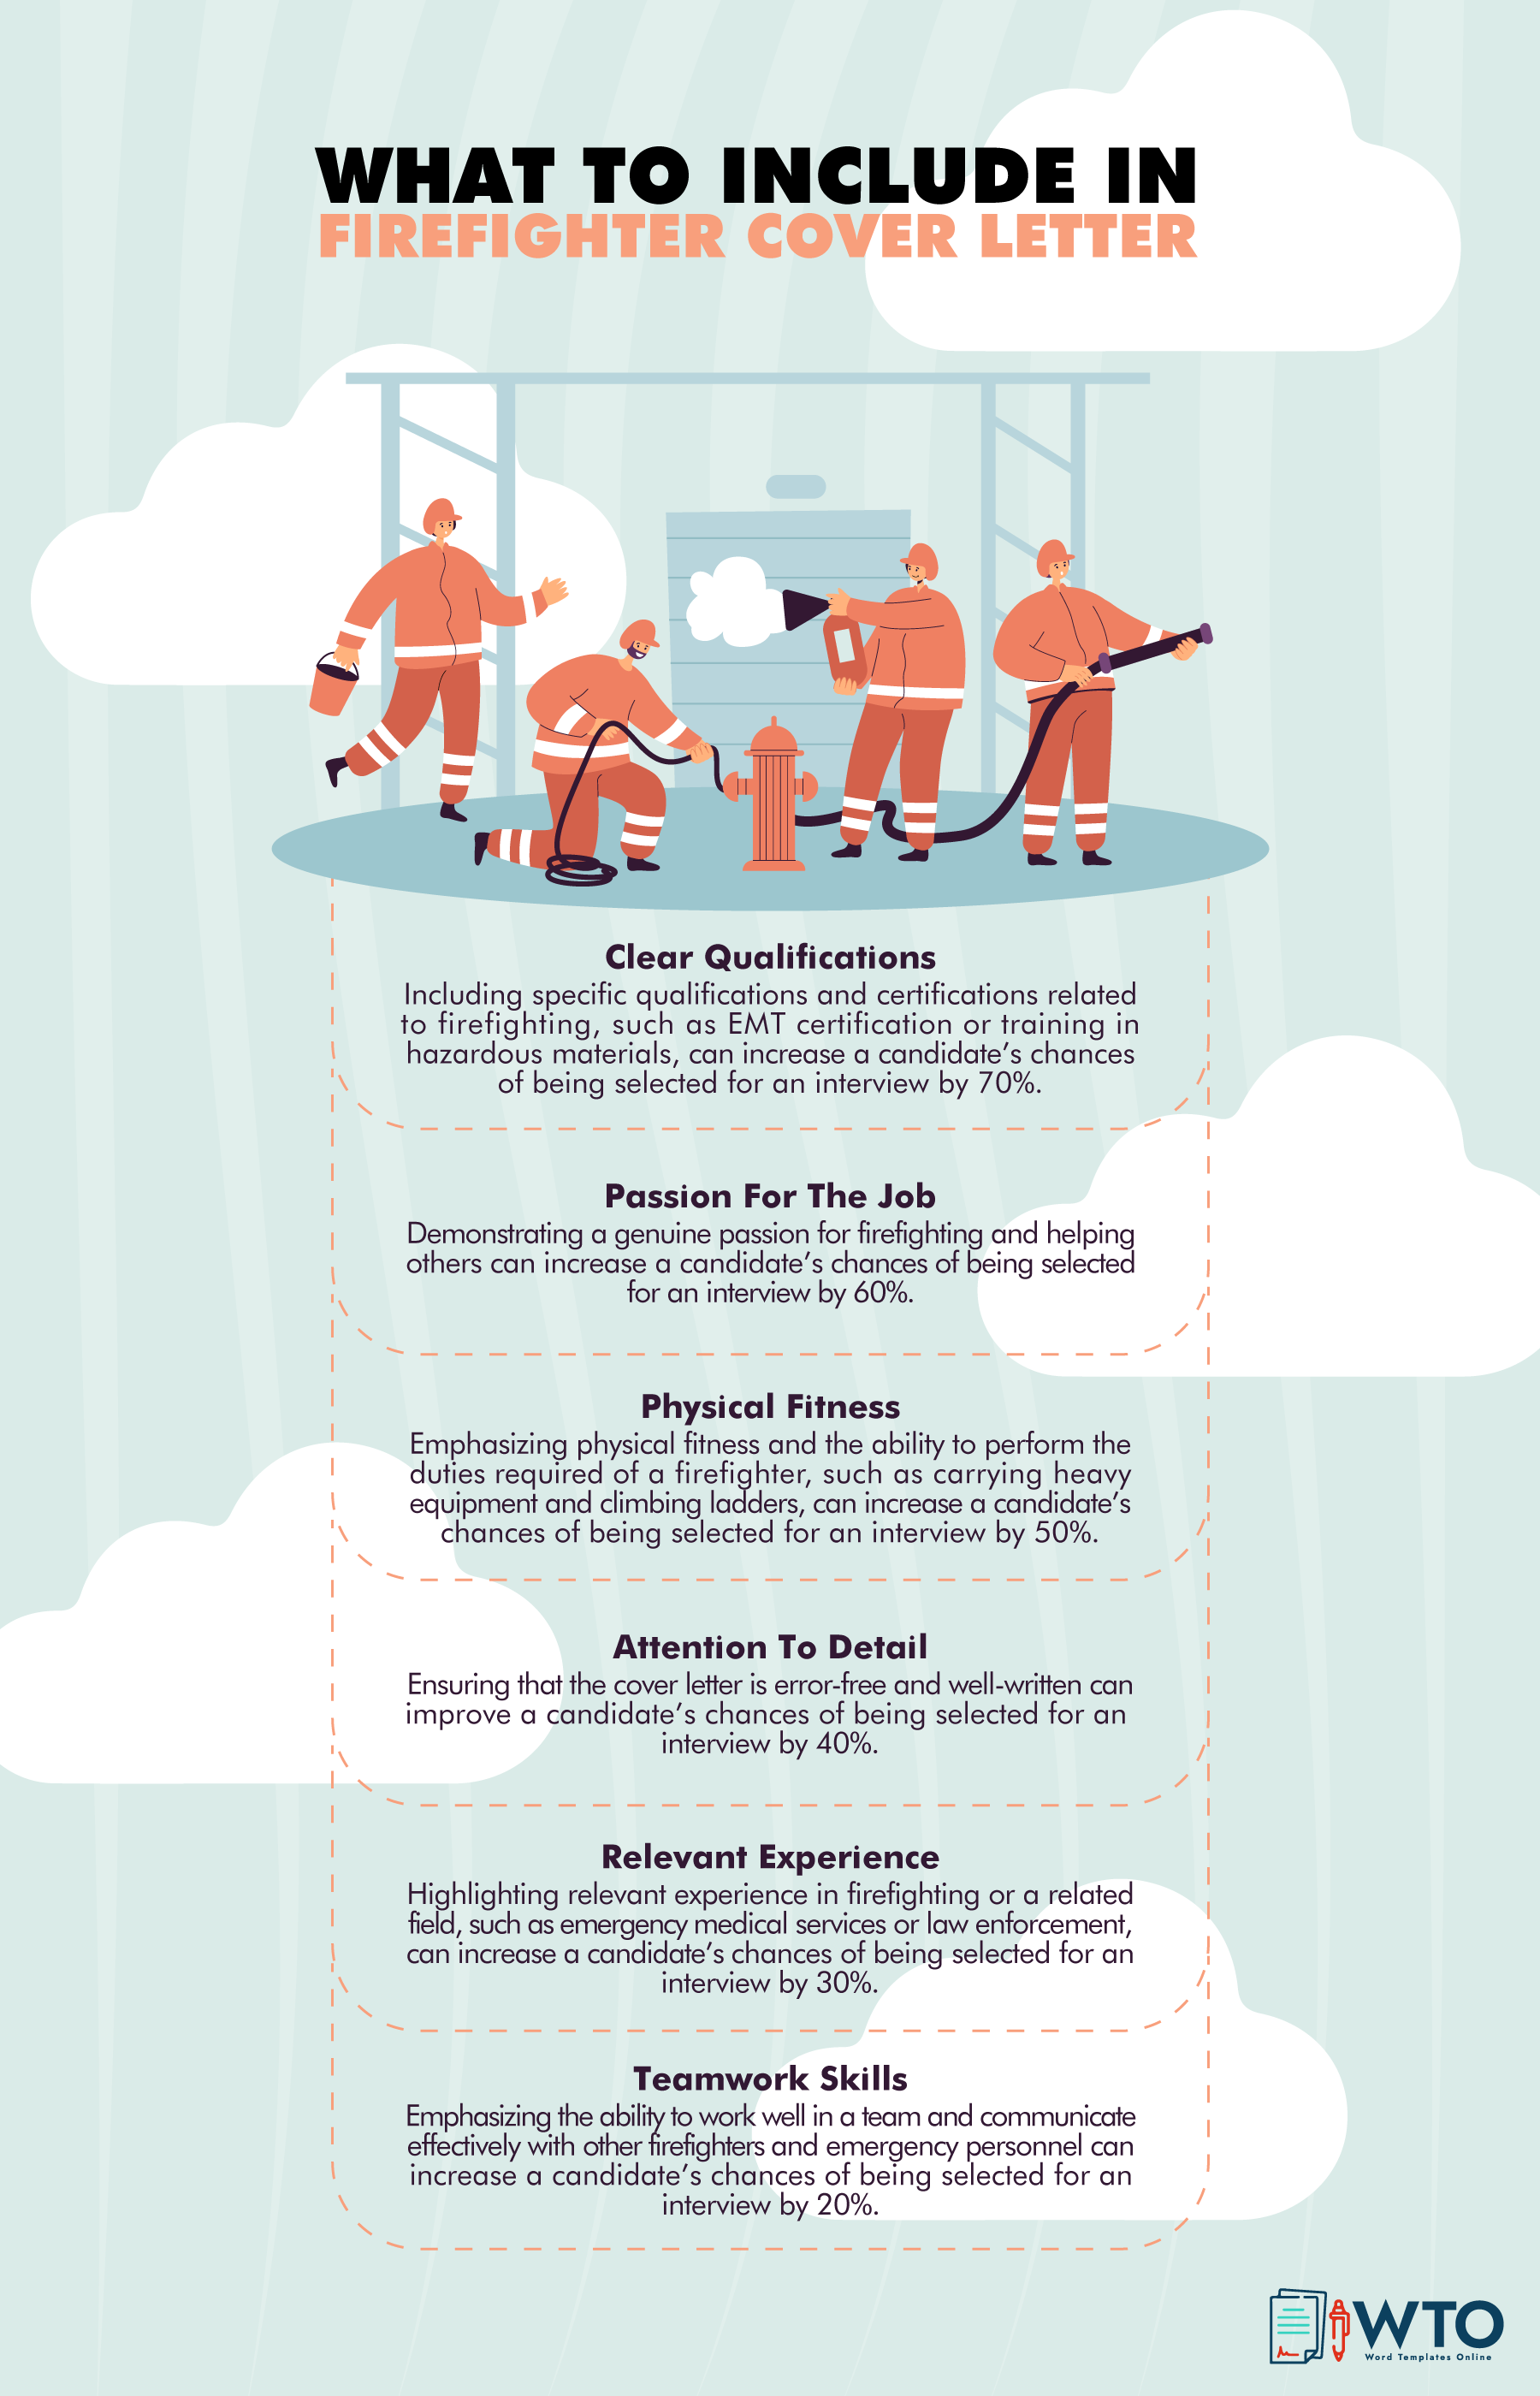 Firefighter cover letter what to include infographic